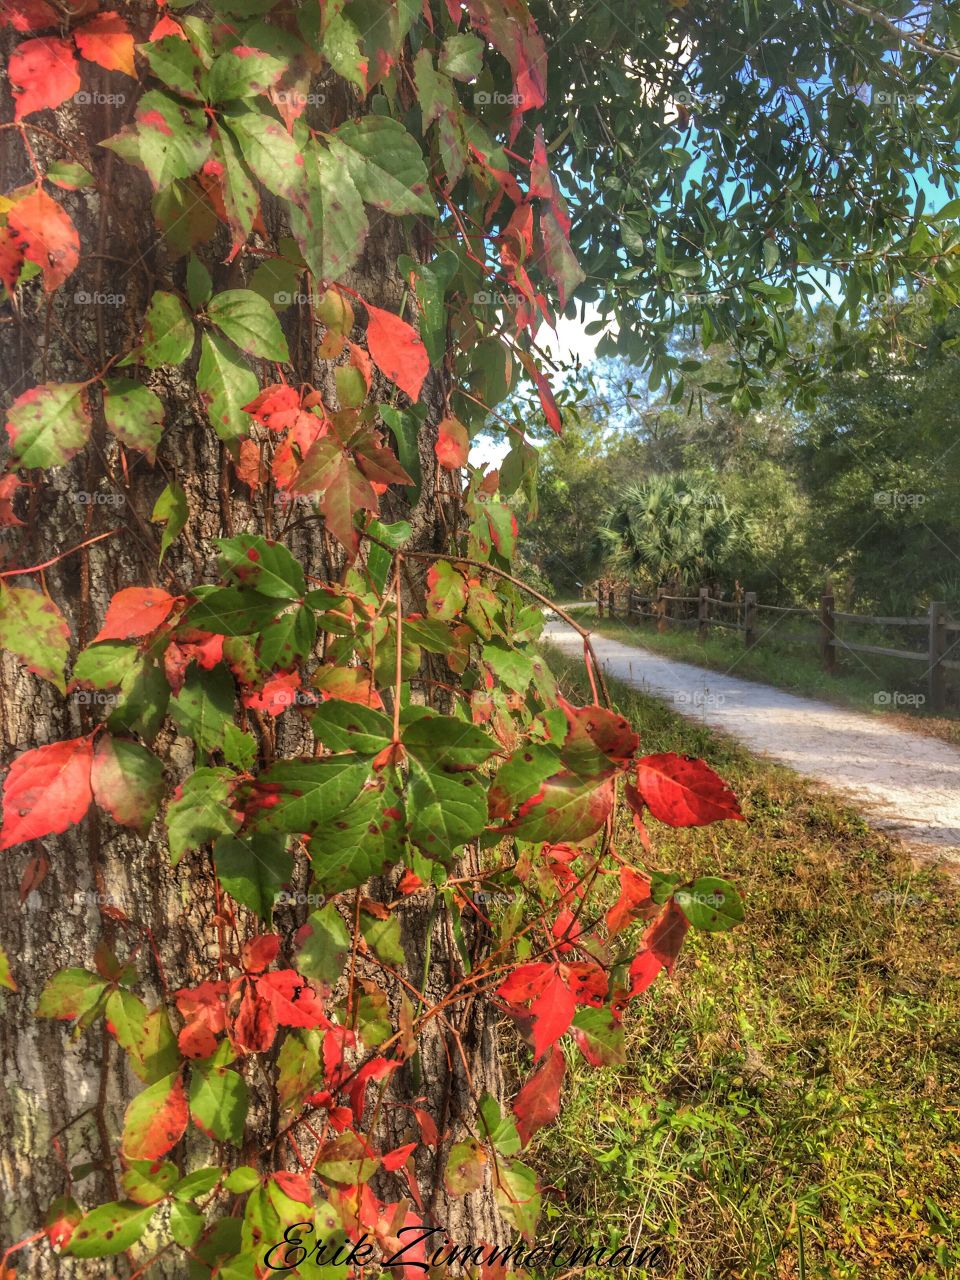 Some leafs do change colors, even in Florida.
